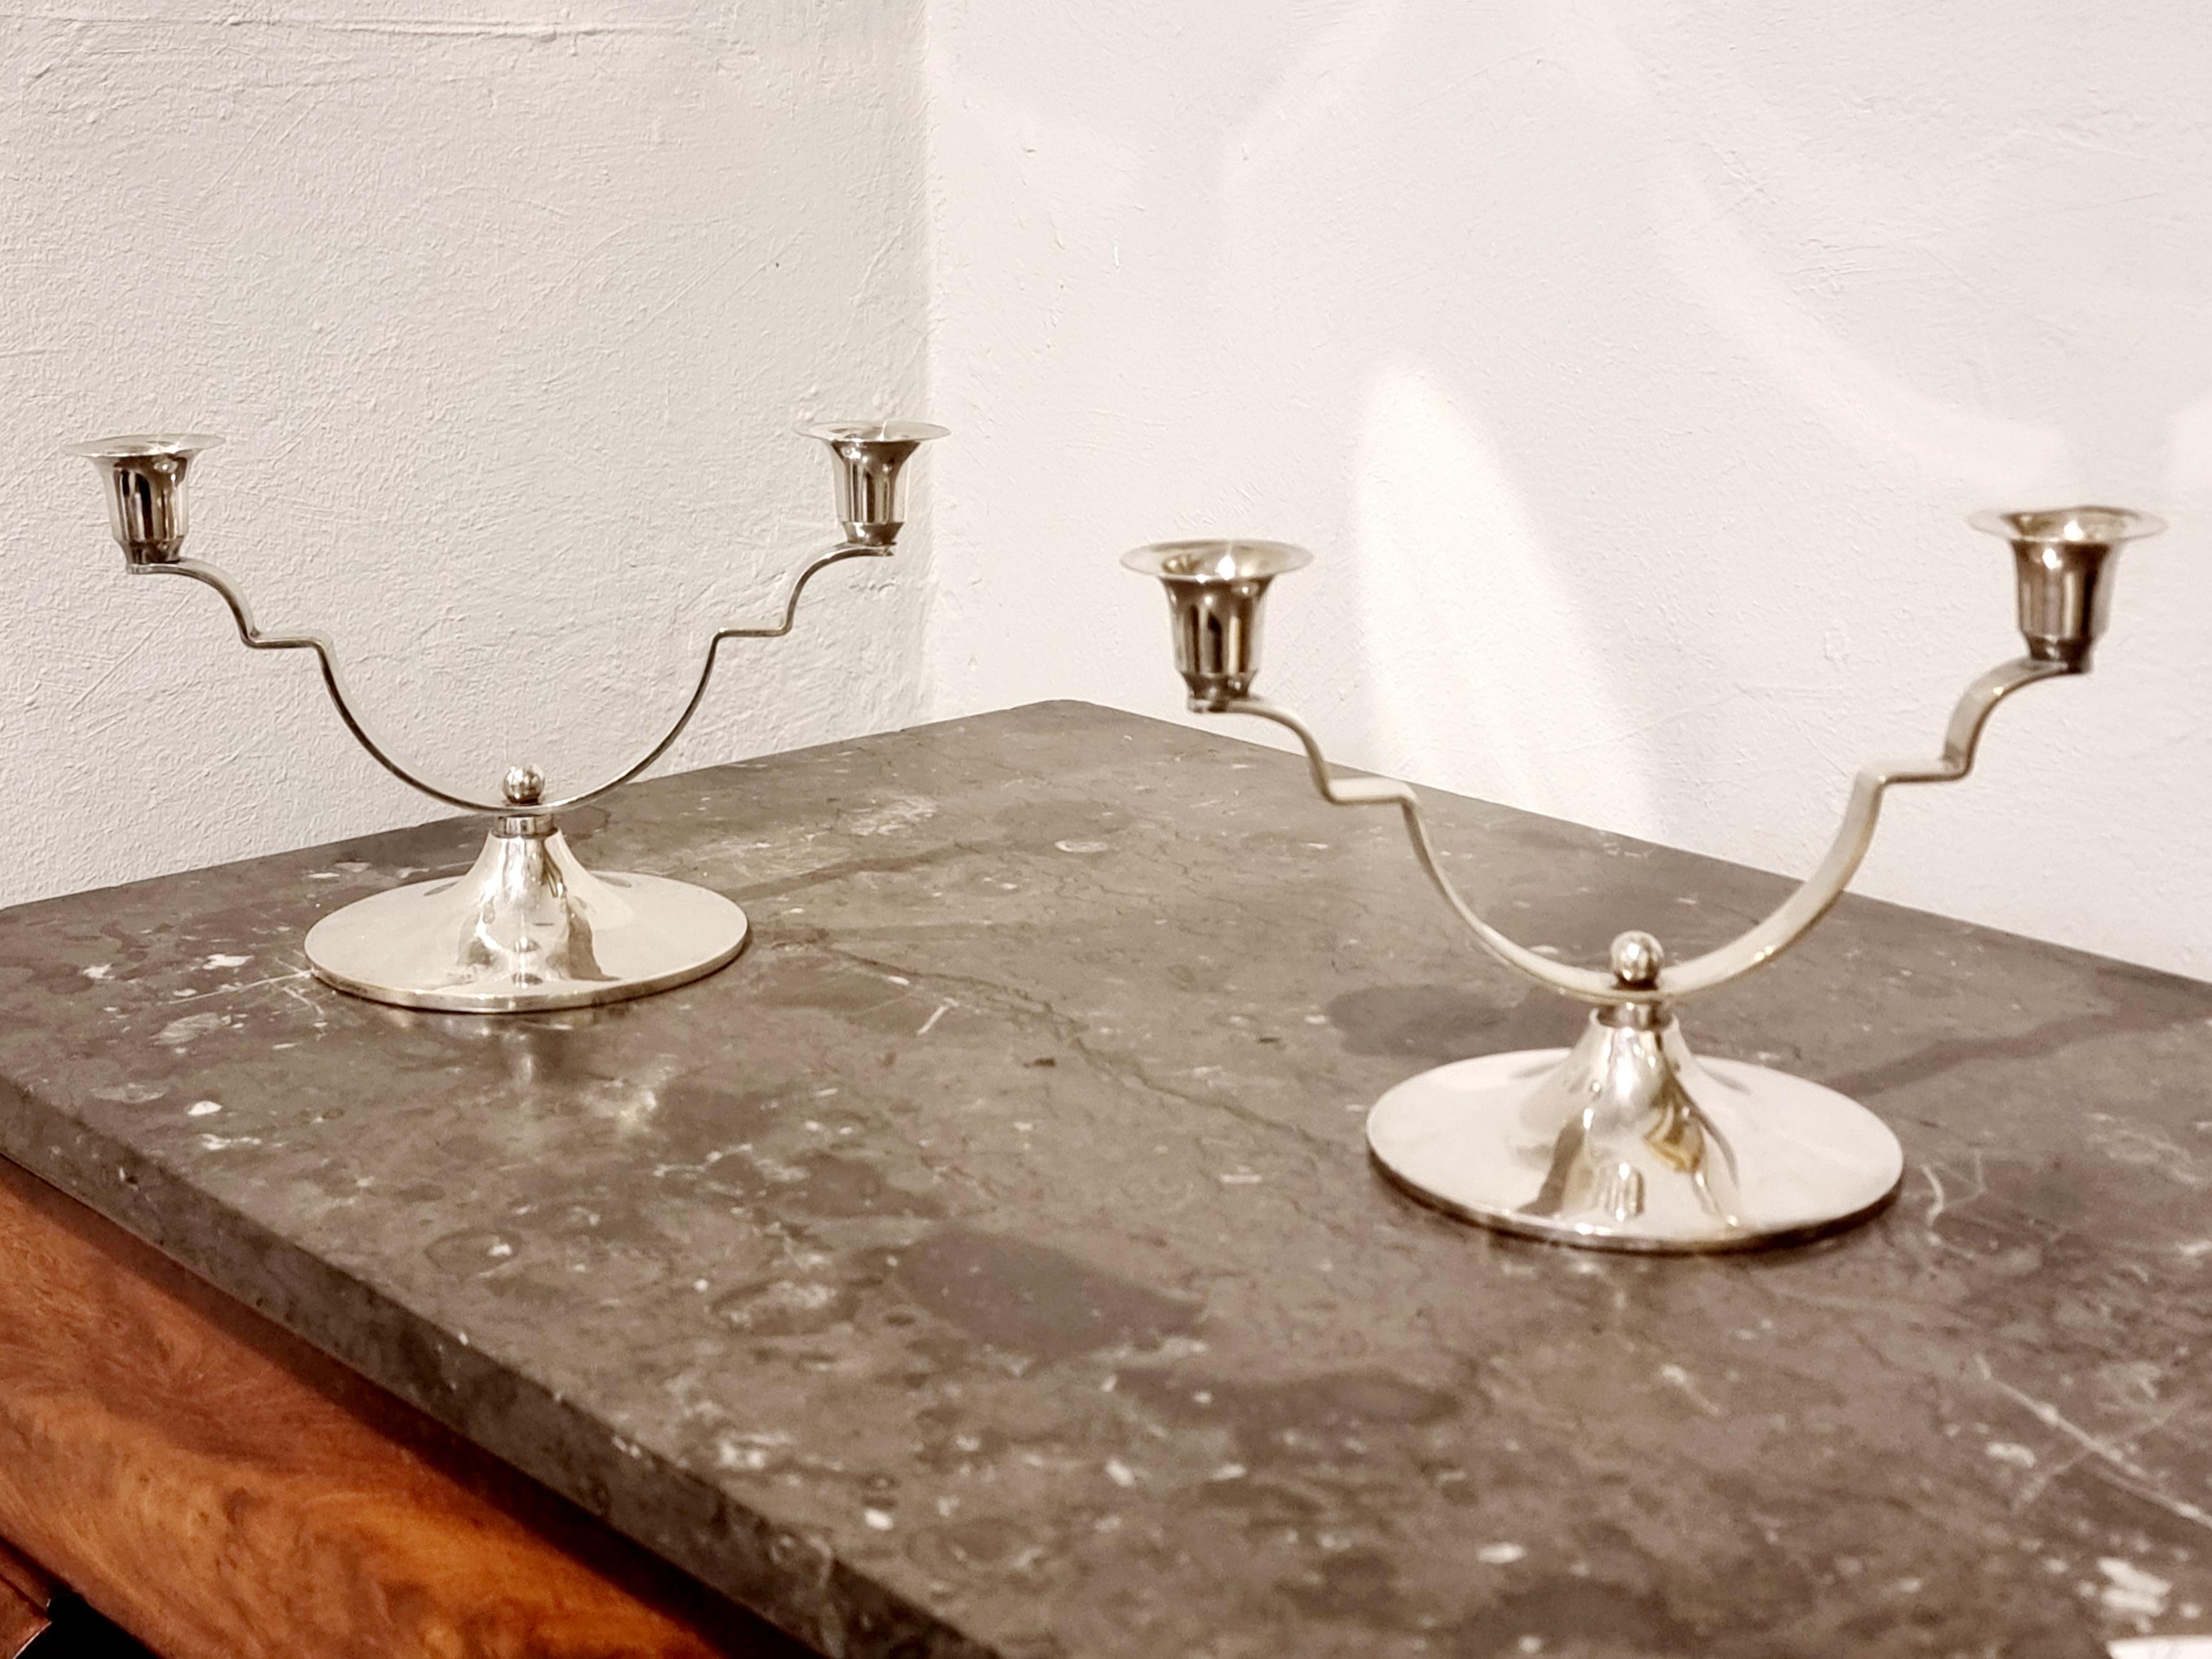 Candle holders by DANA DFA, Denmark, Midcentury / Scandinavian Modern In Good Condition For Sale In Stockholm, SE